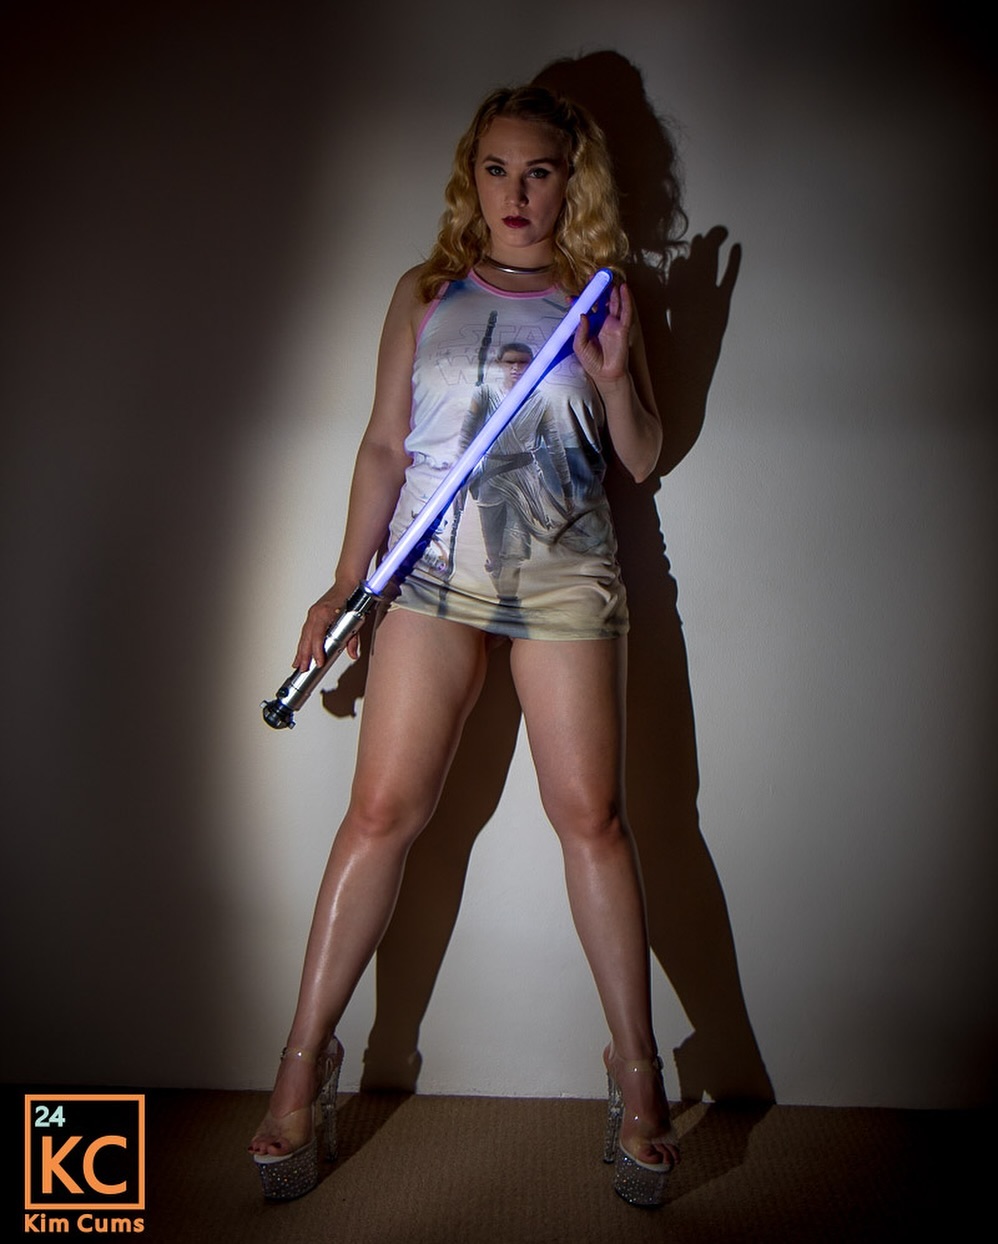 It’s nearly that time of year!
🌐Visit my Official Website to see all my StarWars content from over the years!
.
#maythe4thbewithyou #maythefourthbewithyou #starwarsday